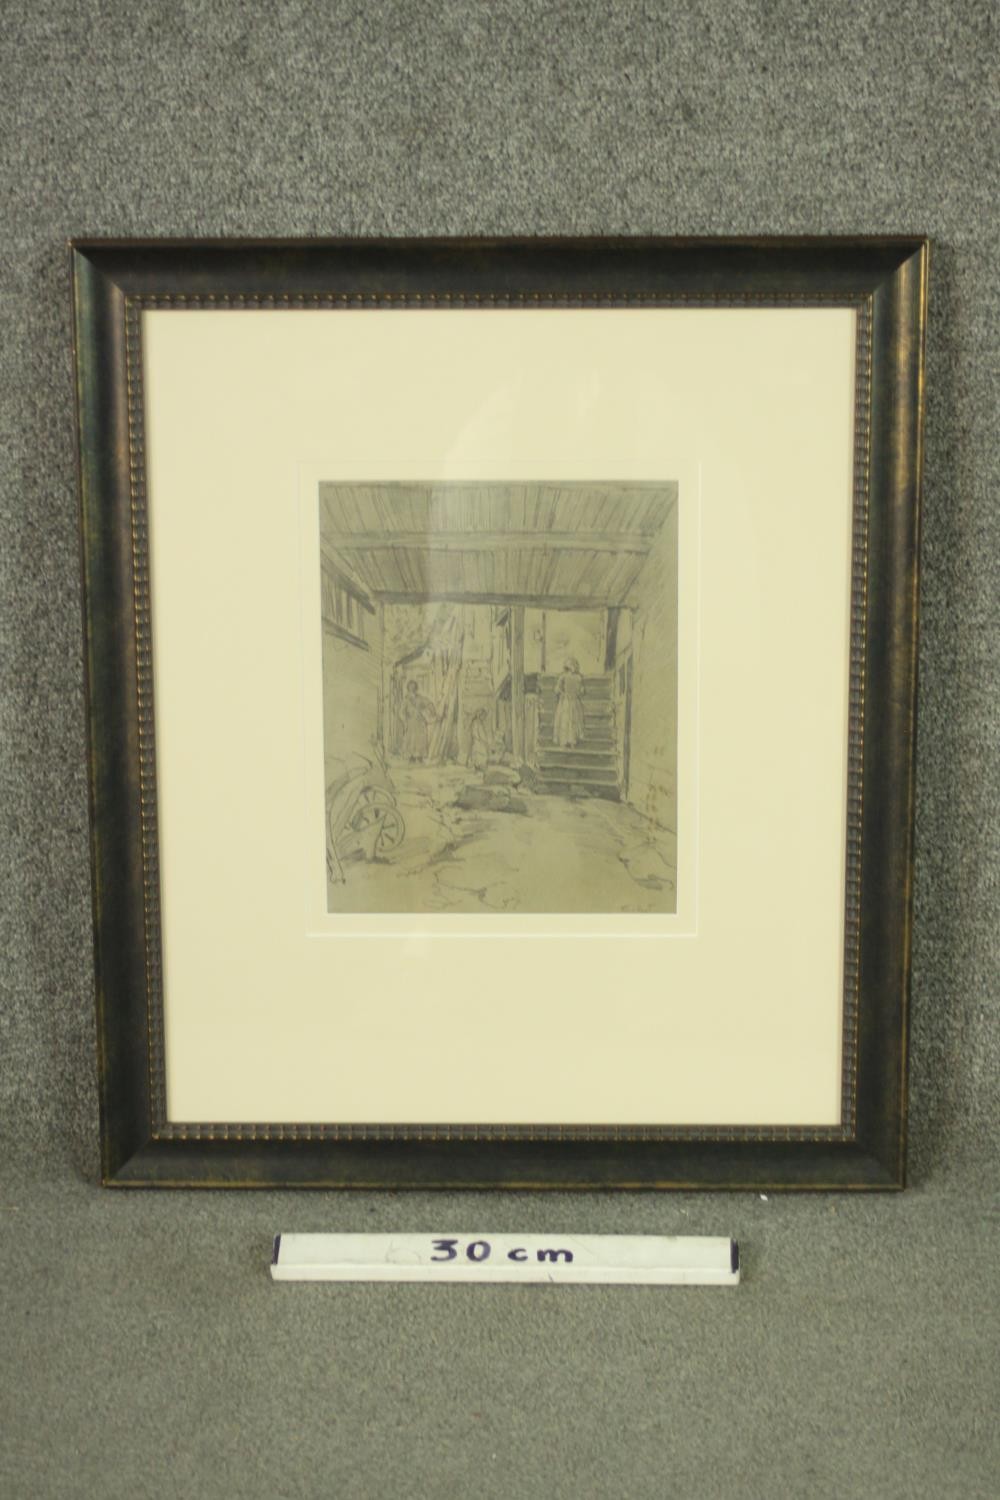 Charles Huot (Canadian 1855-1930) 'The Farmyard', pencil drawing, signed lower right, with Zwicker's - Image 3 of 7